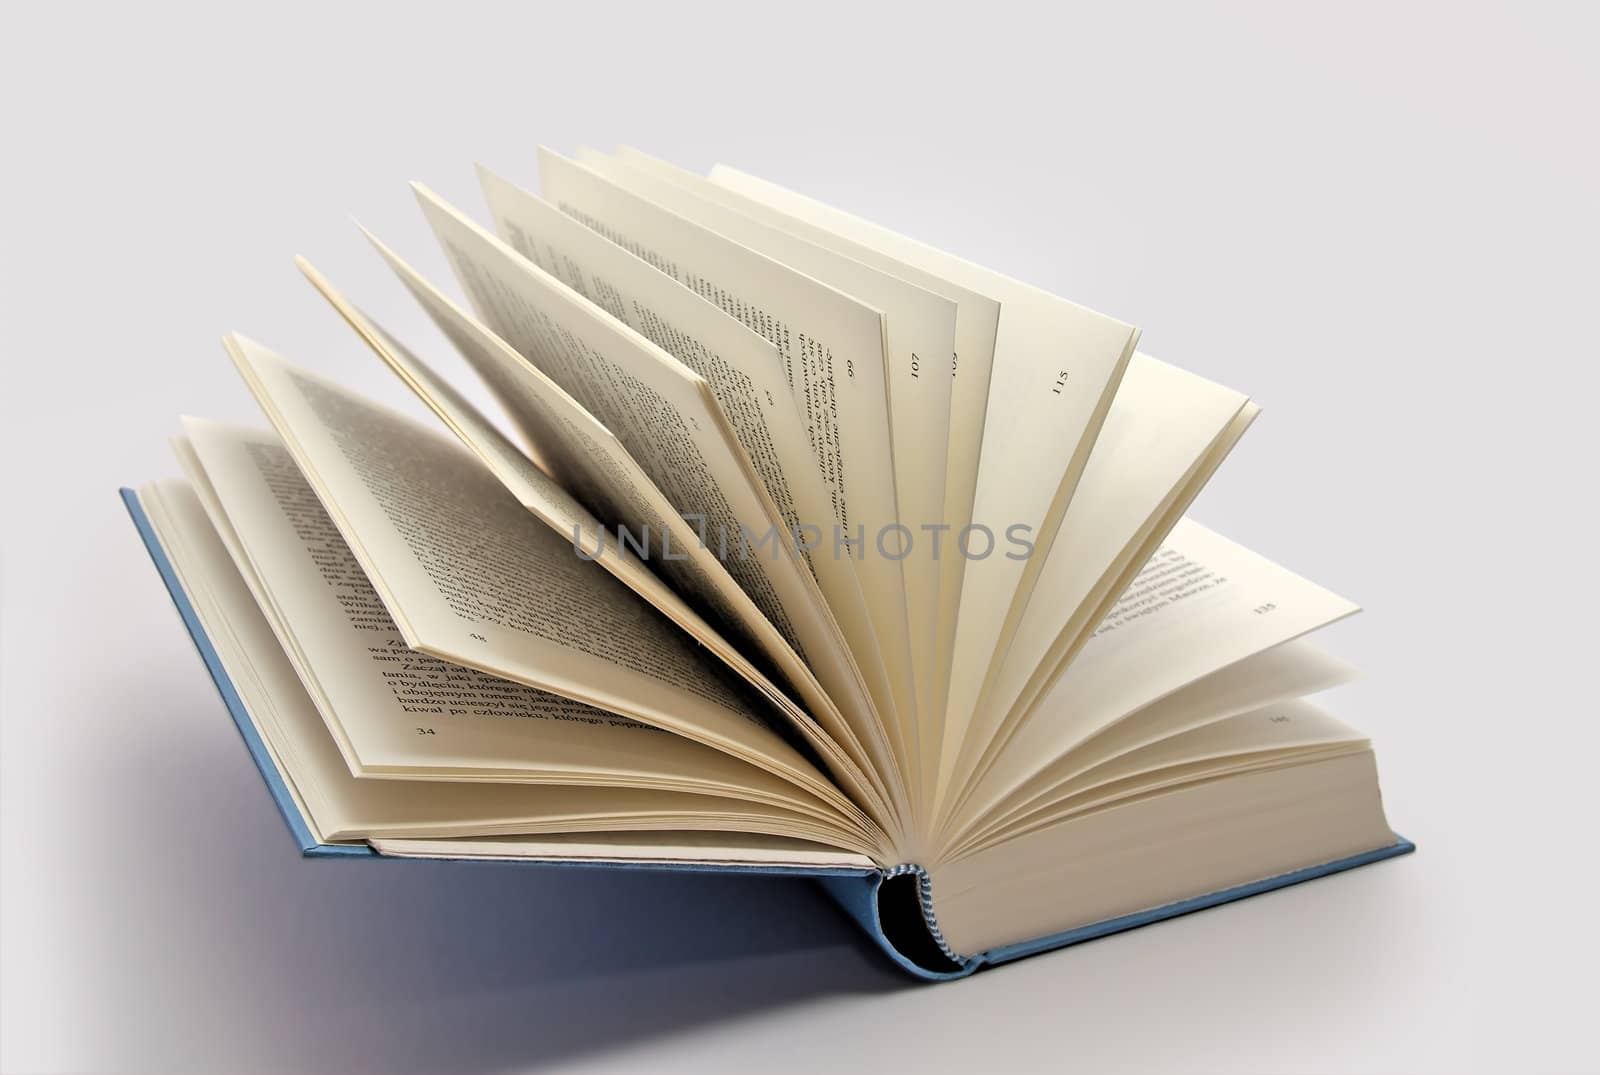 book on the white background